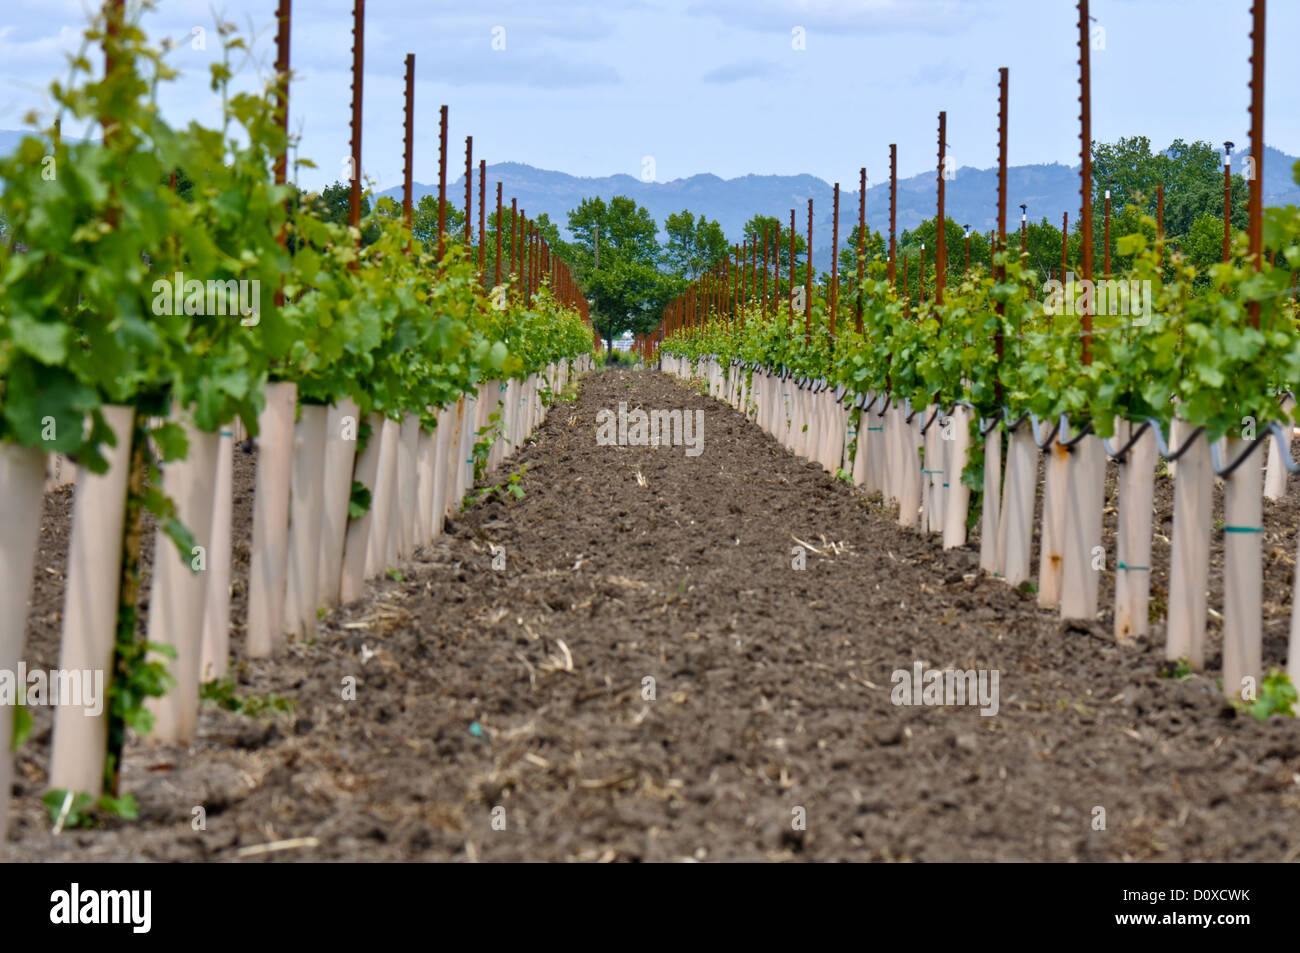 Rows of Young Grape Vines in Napa Valley California Stock Photo